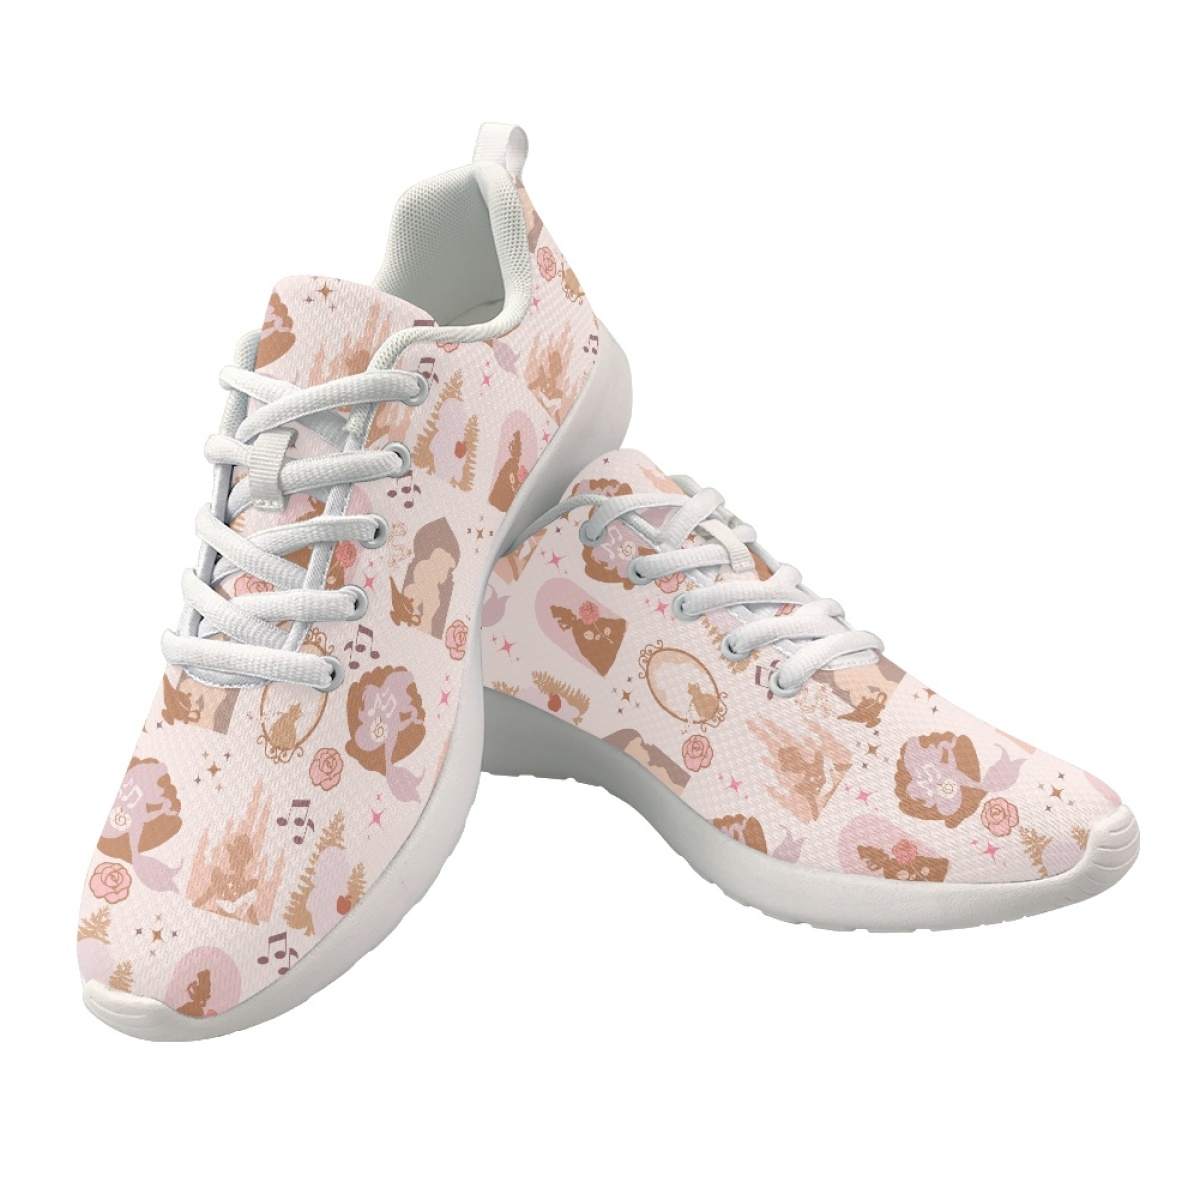 PREORDER Princess Inspired Women's Lace up Shoes